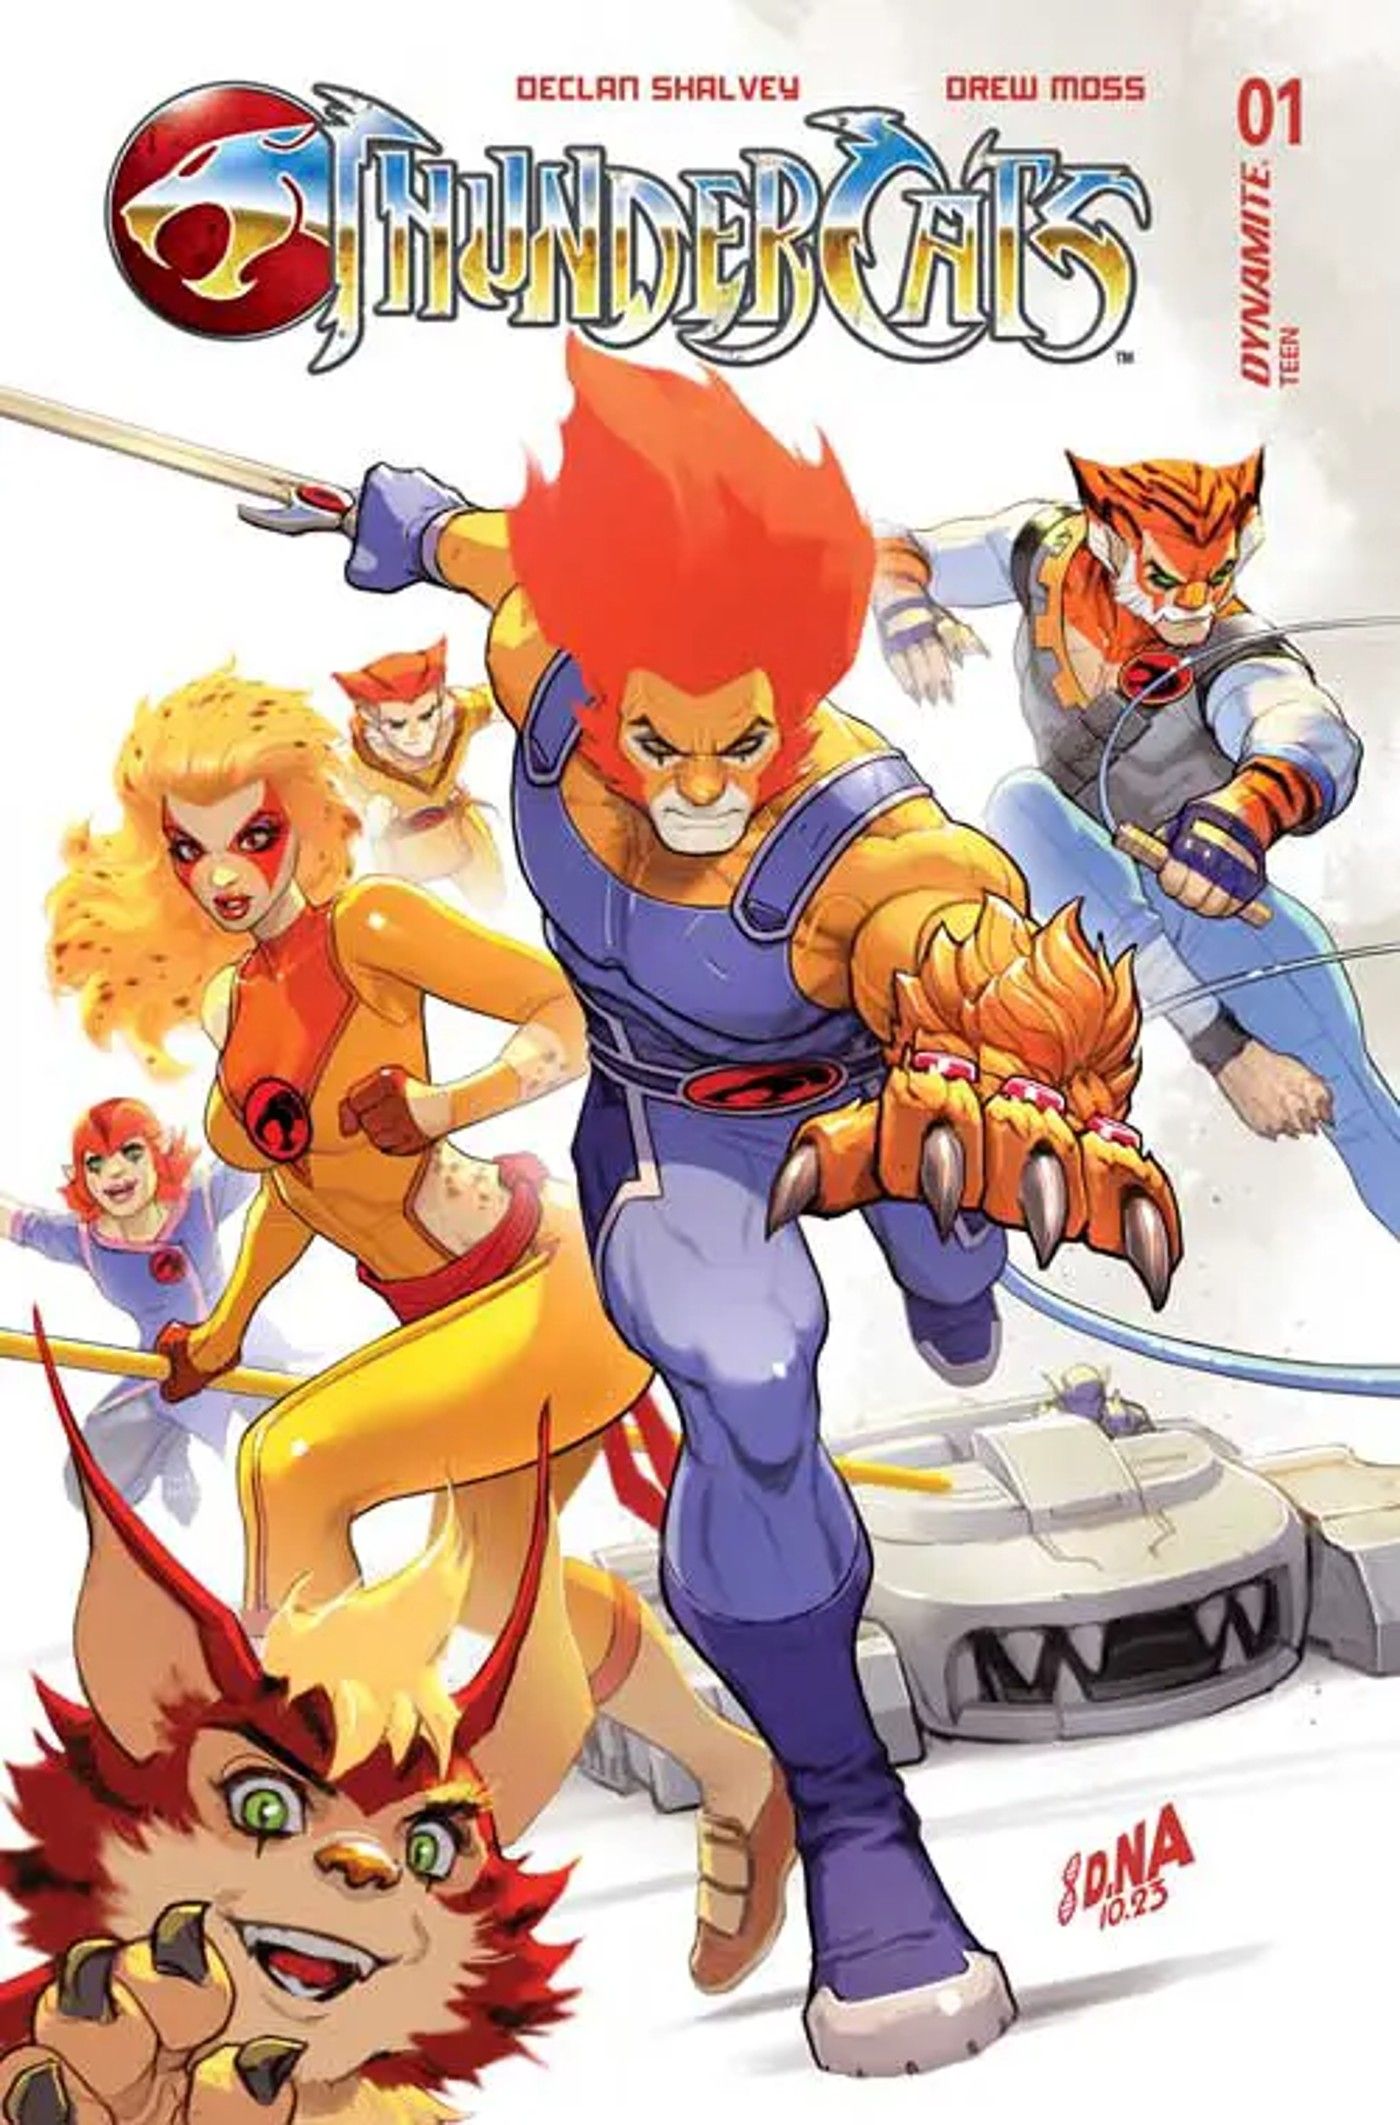 Image of the Thundercats leaping into battle